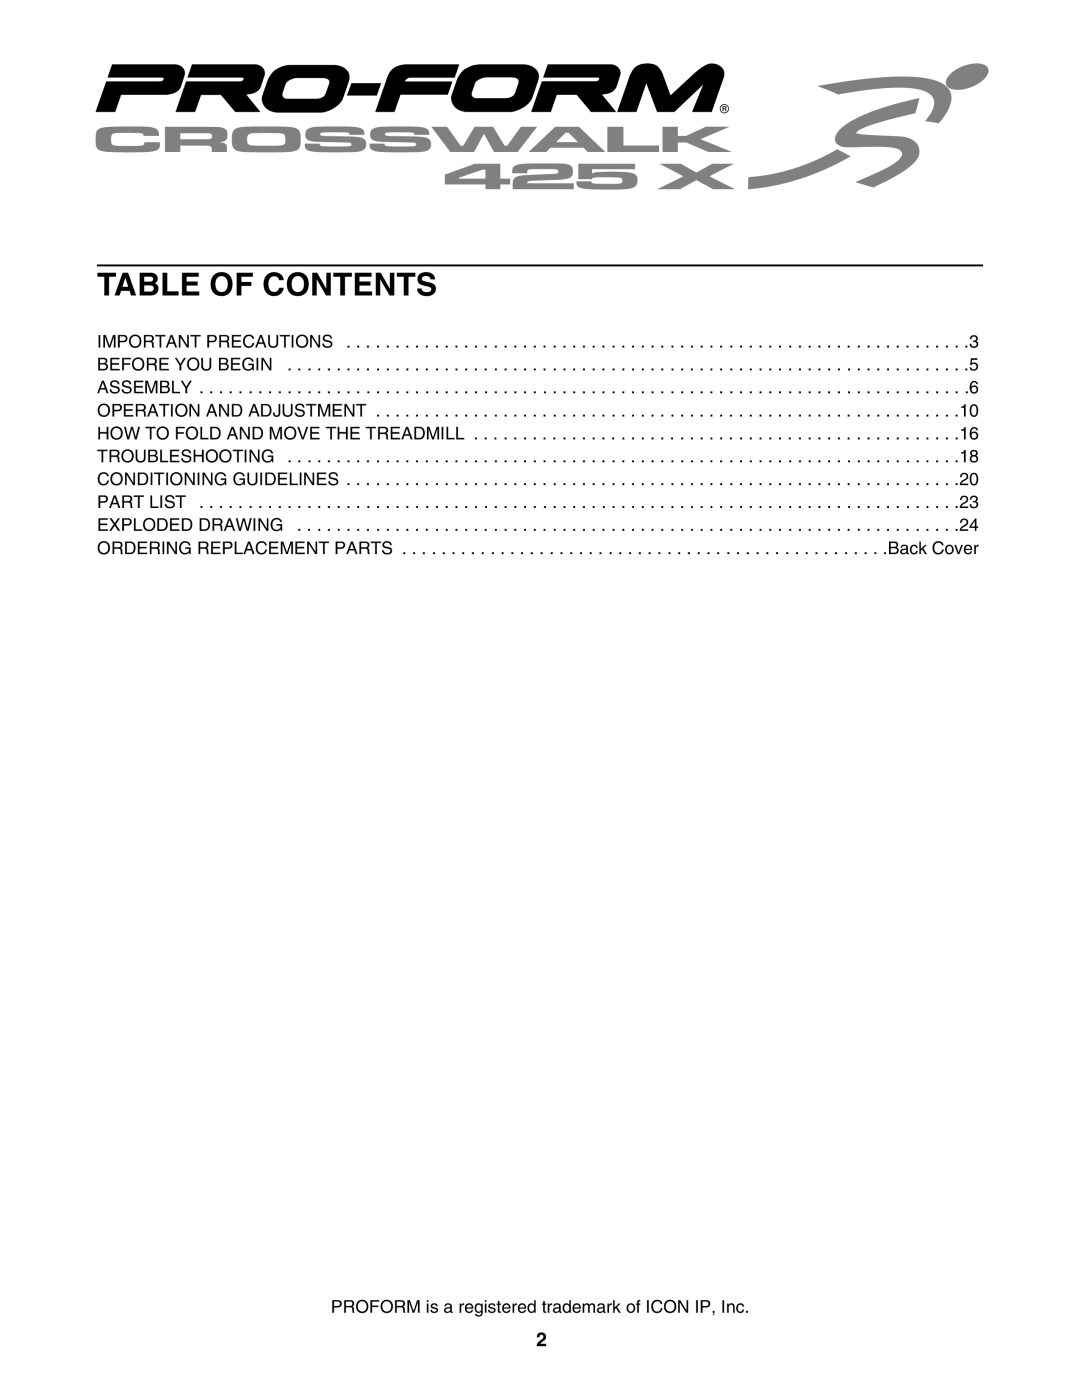 ProForm PMTL32706.0 user manual Table Of Contents, PROFORM is a registered trademark of ICON IP, Inc 